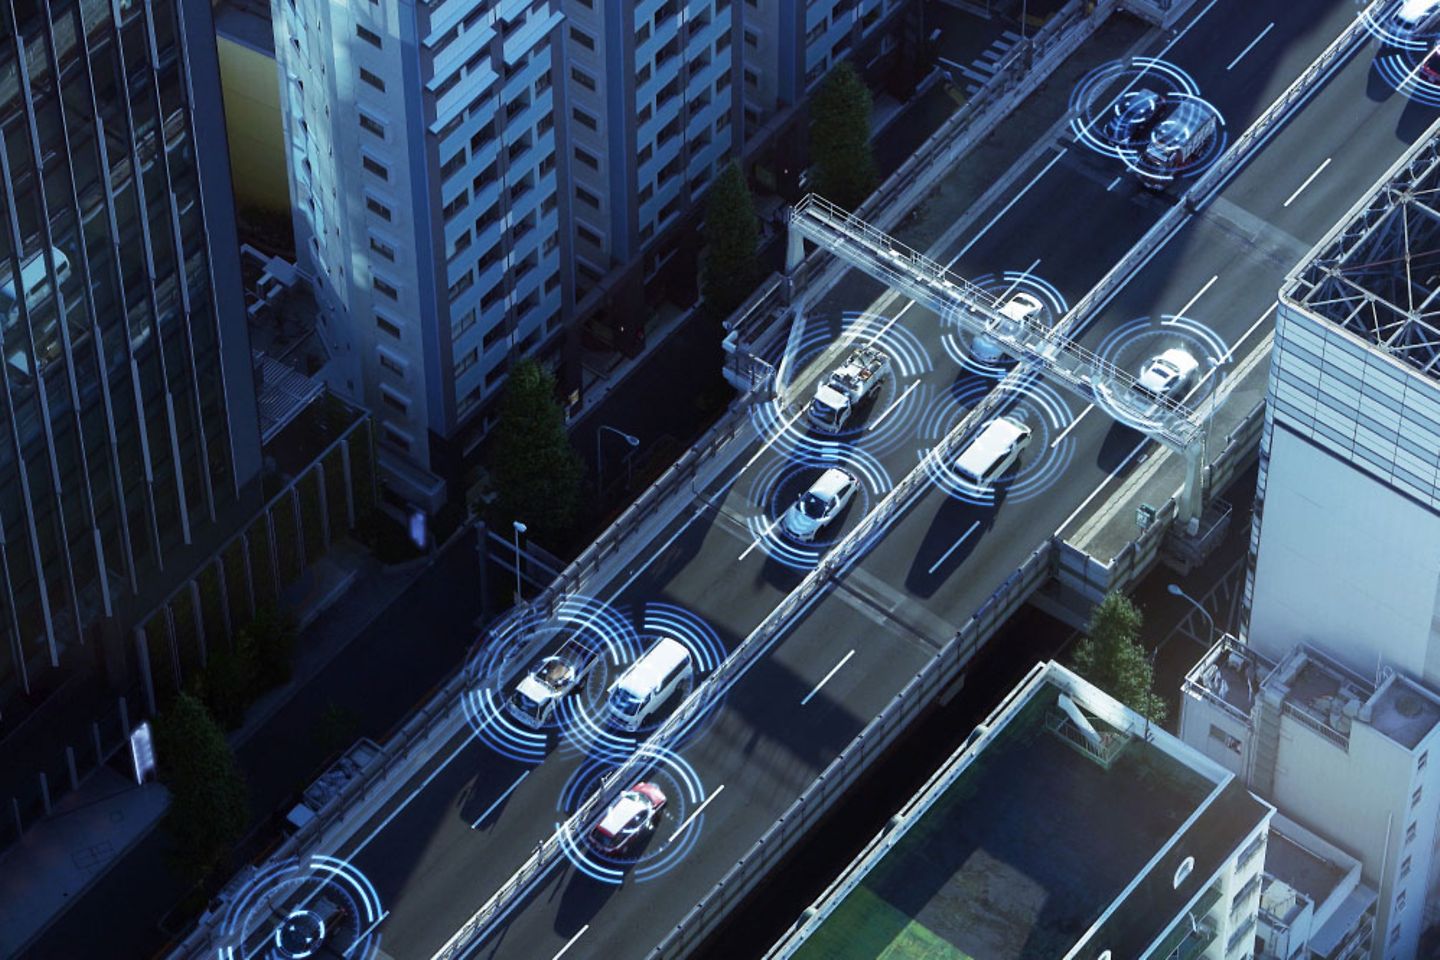 A street full of cars with sensors